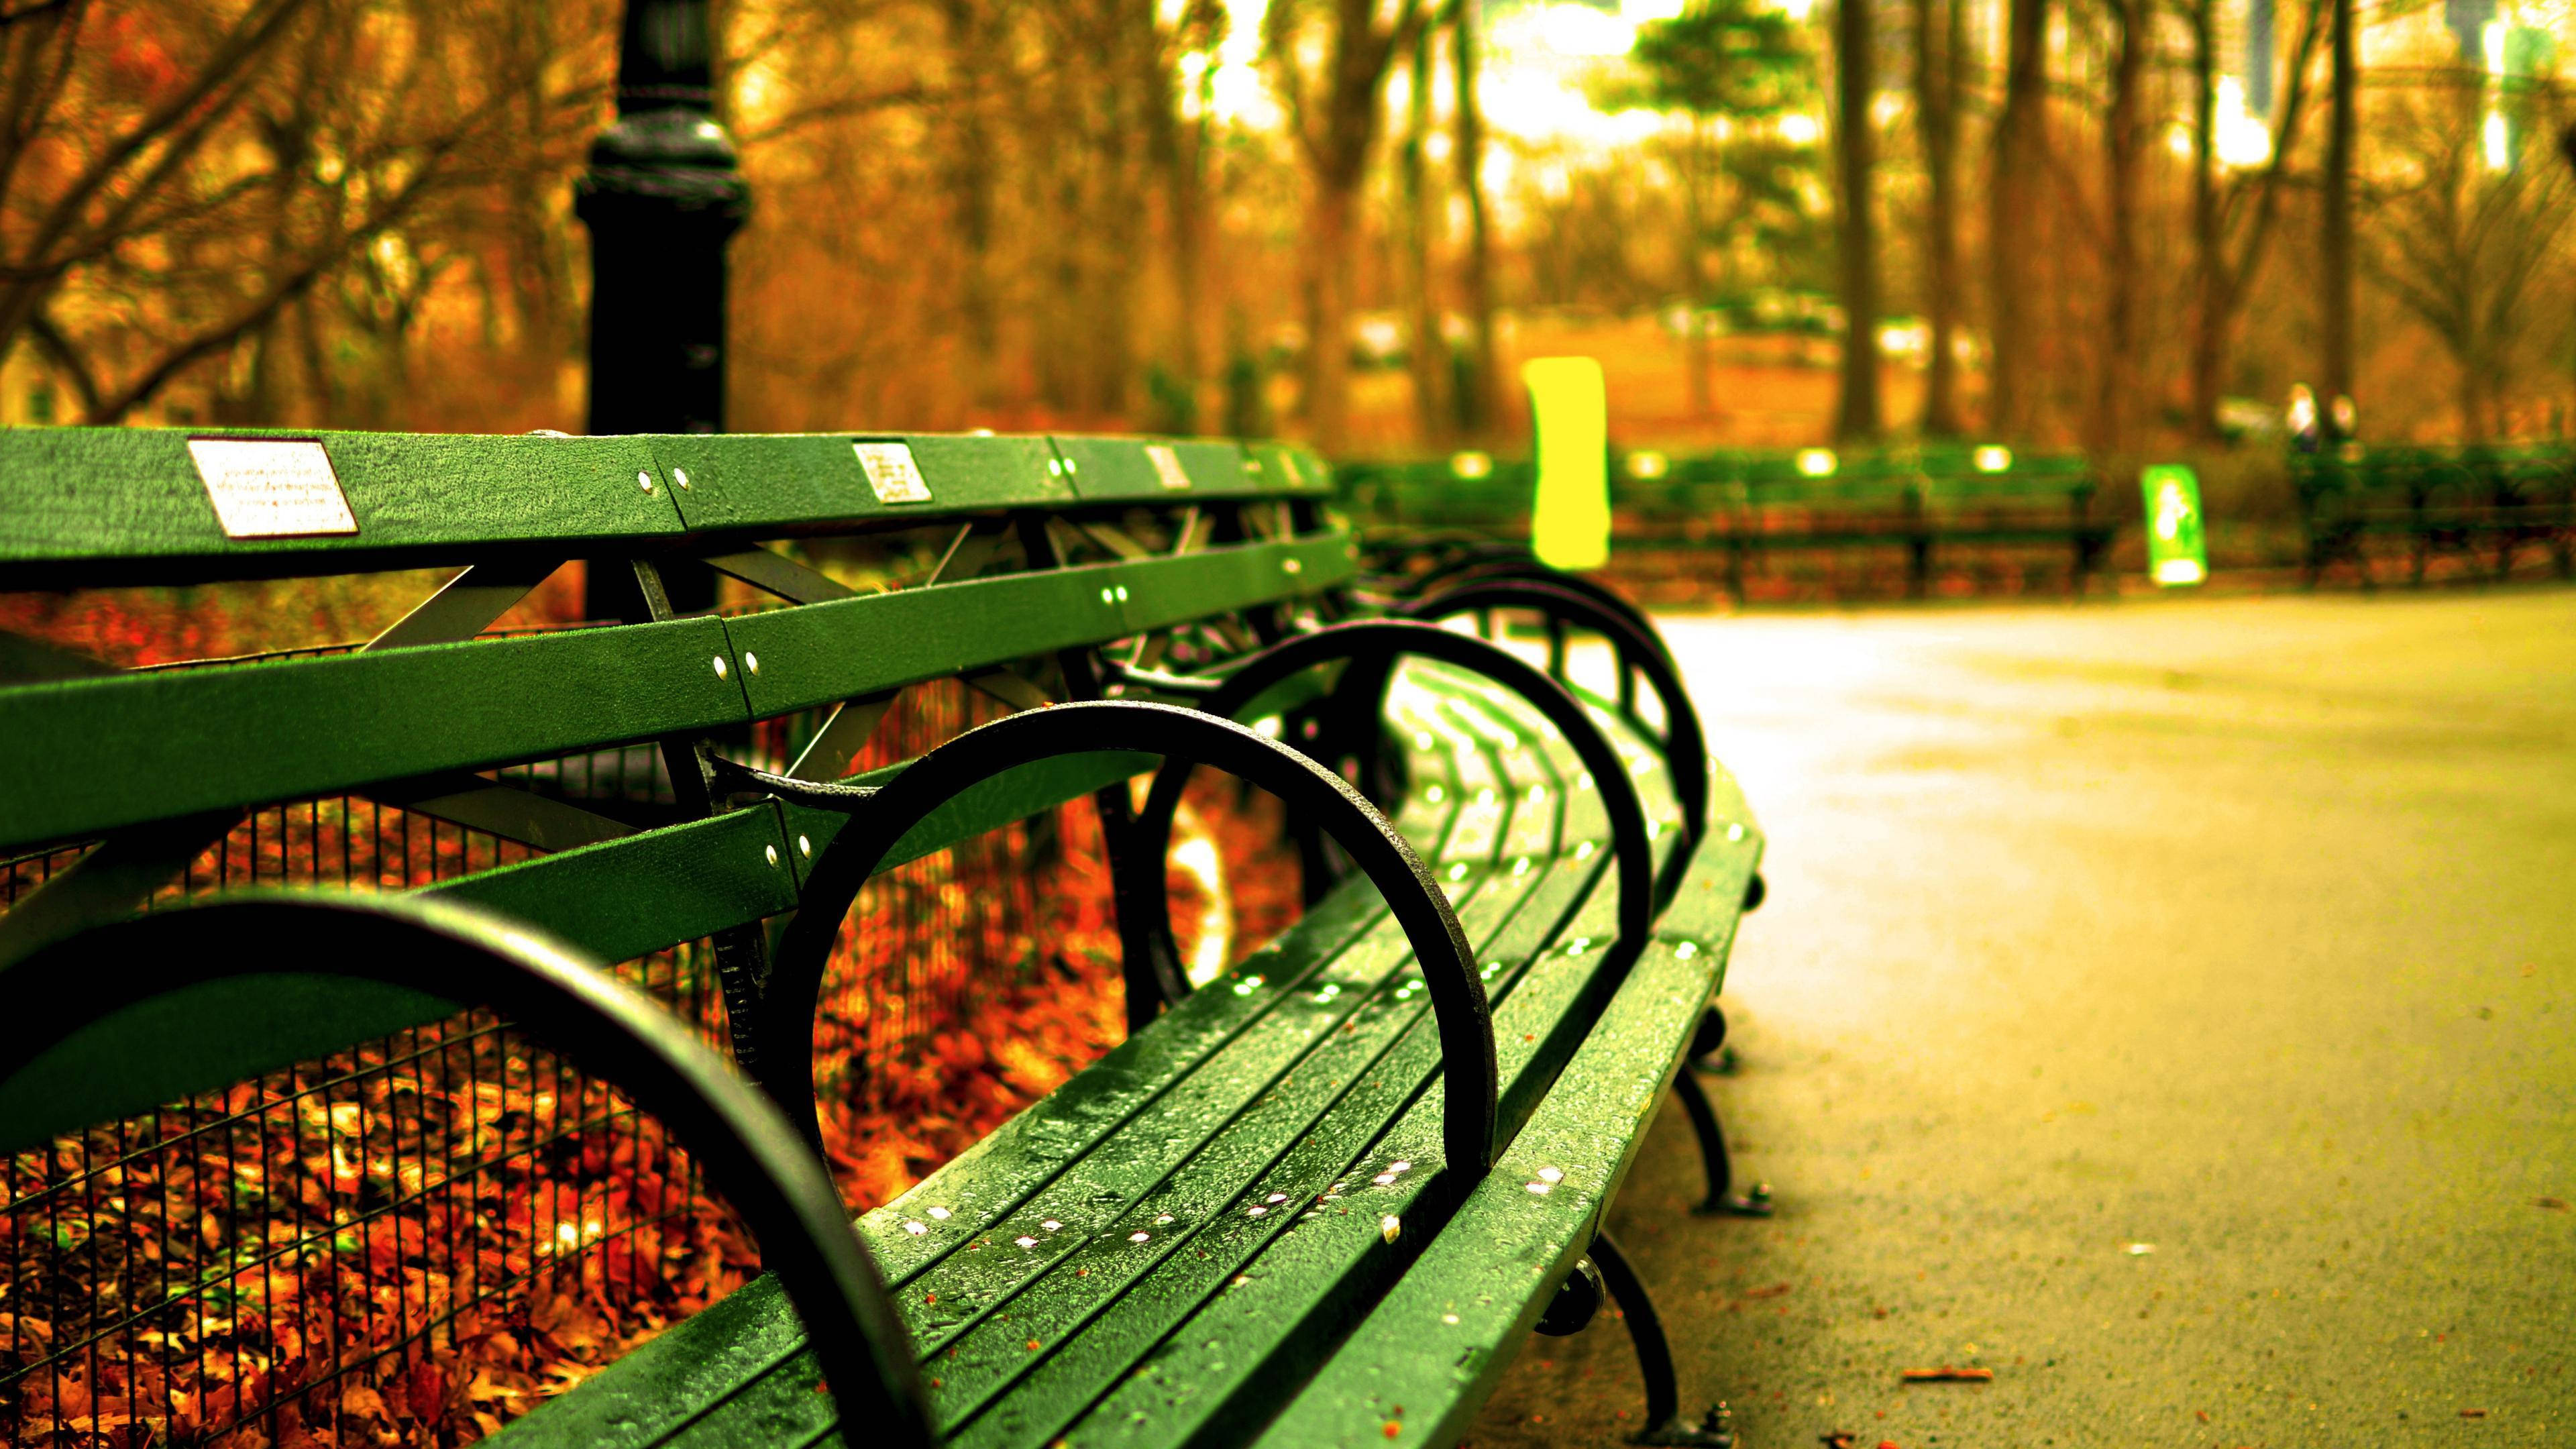 Spend Some Time To Relax In The Green Park Bench Background